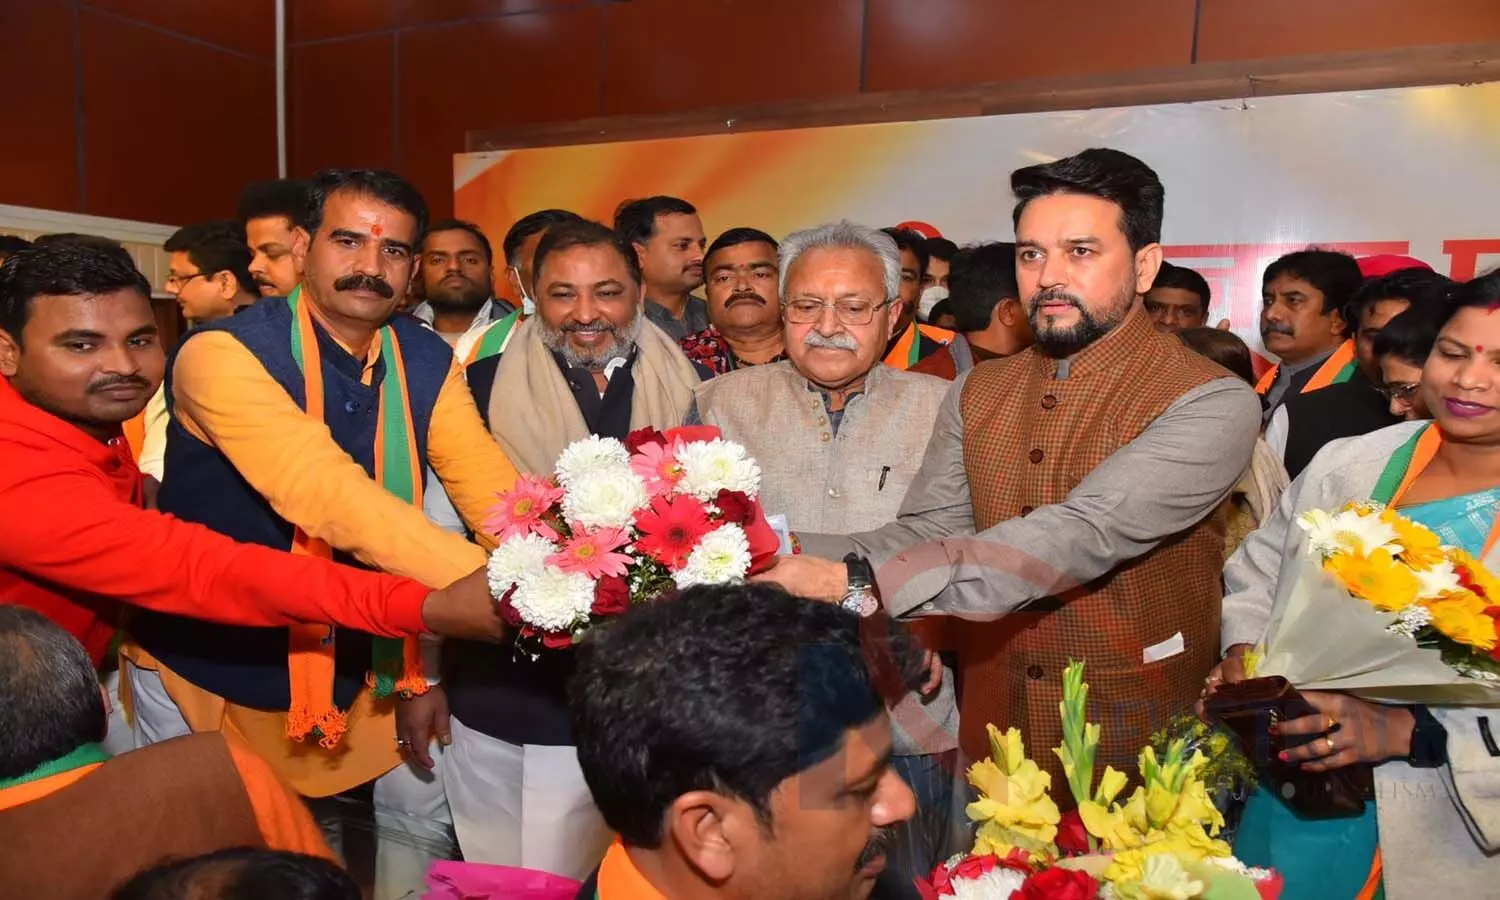 UP Election 2022: Union Minister Anurag Thakur gave membership of BJP to people of different parties, see photos